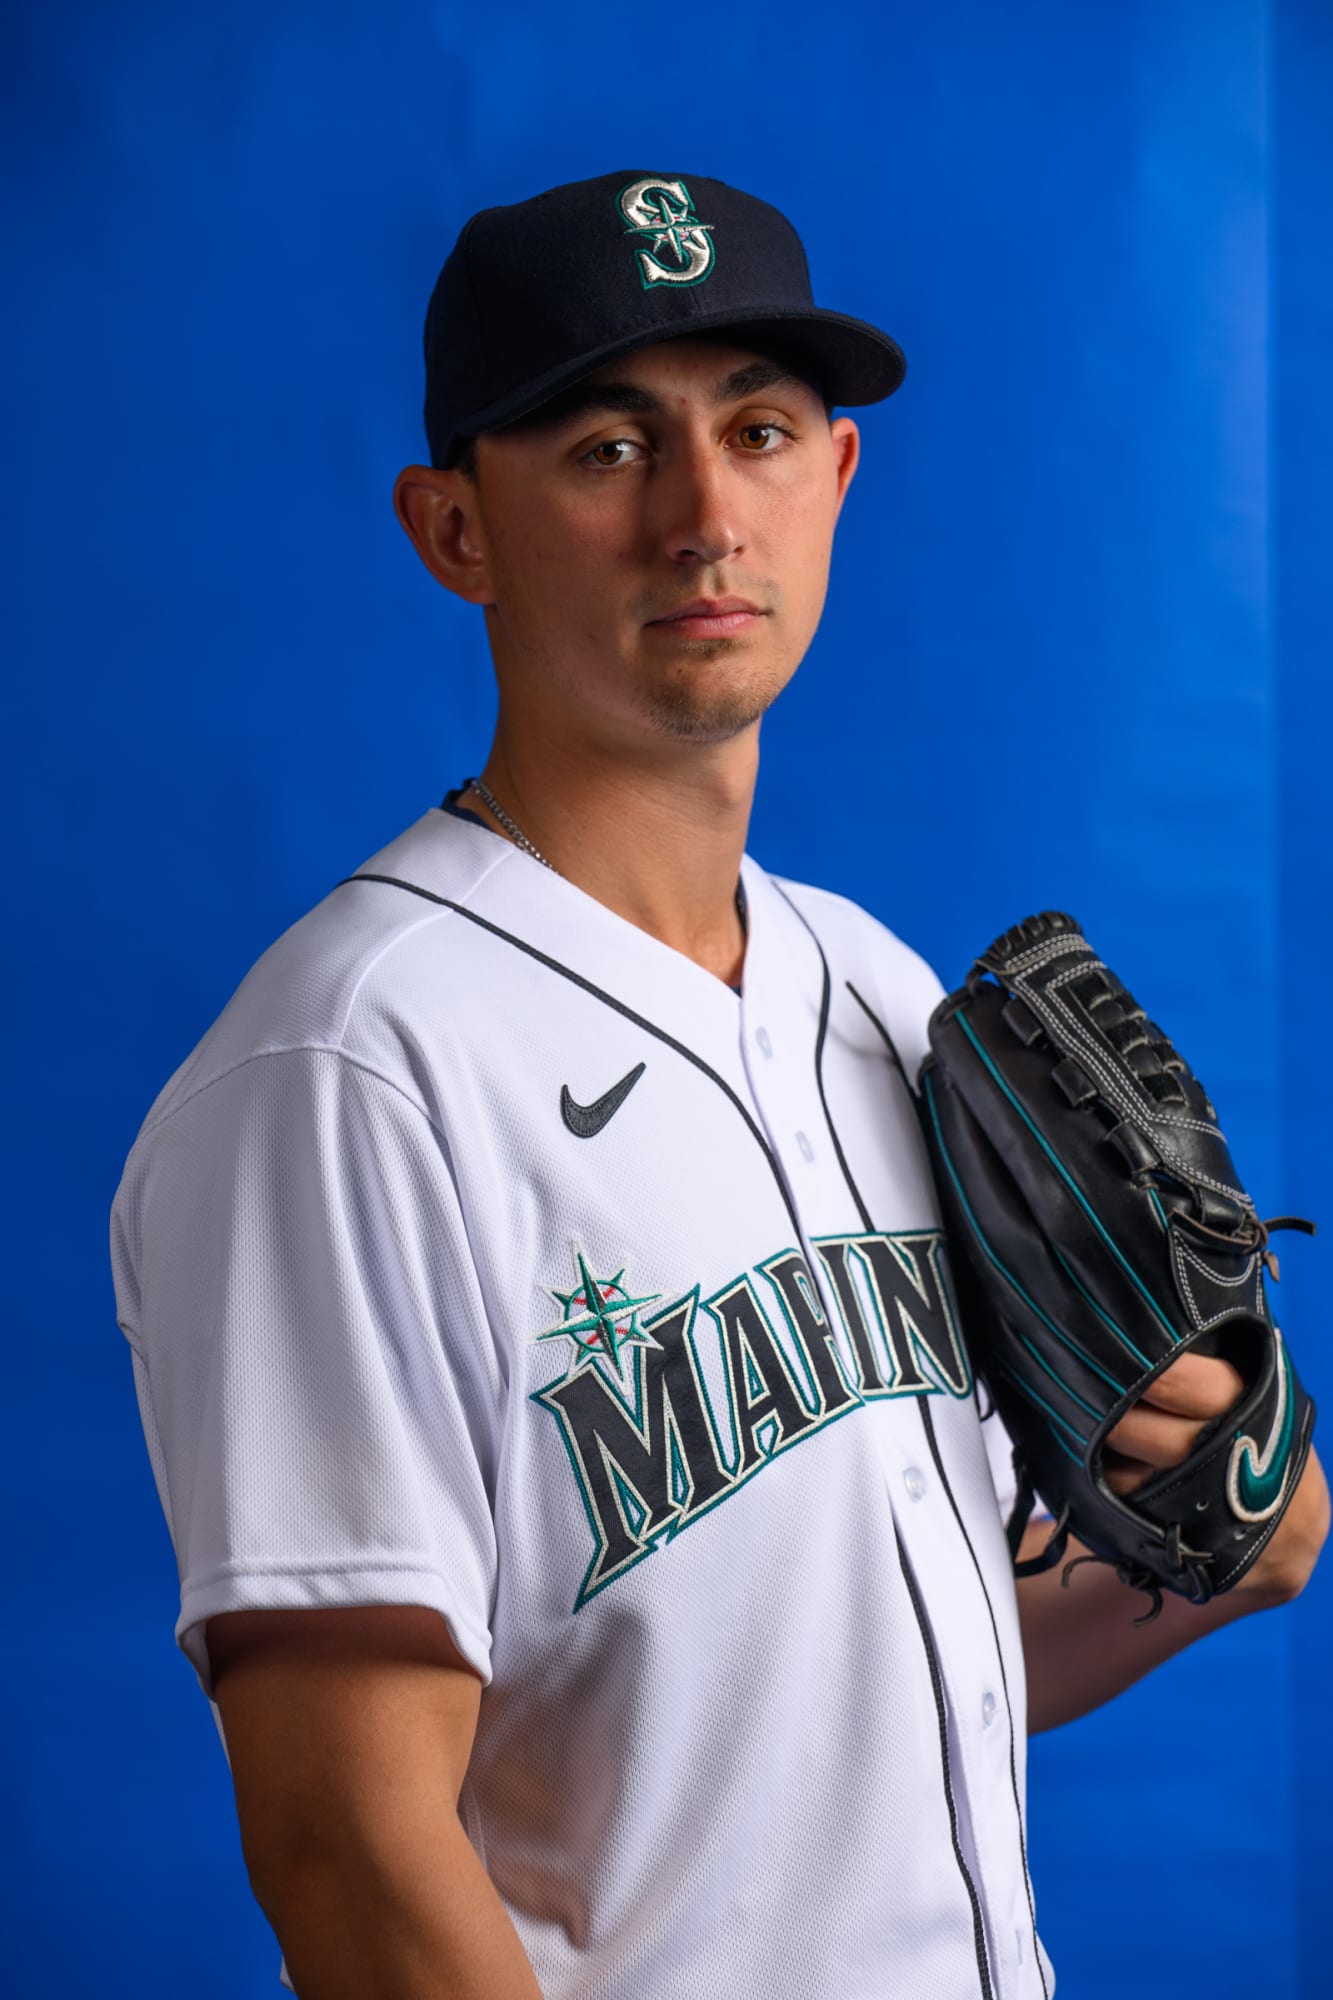 Top Mariners Prospect Kirby Set to Make First Career Start